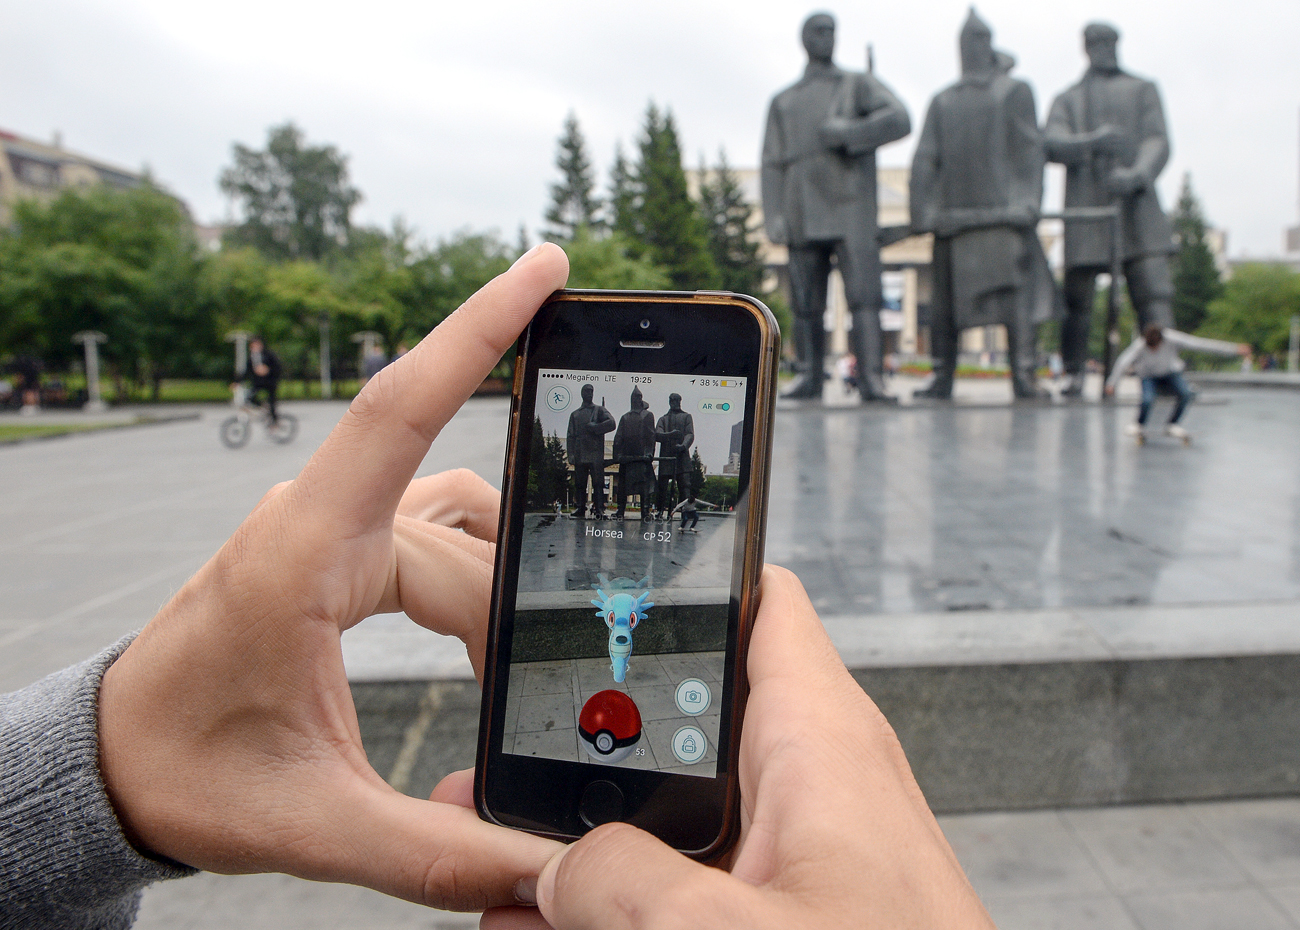 Pokémon Go, the mobile game from Nintendo, on their mobile phones in the park across the street from the Novosibirsk Opera